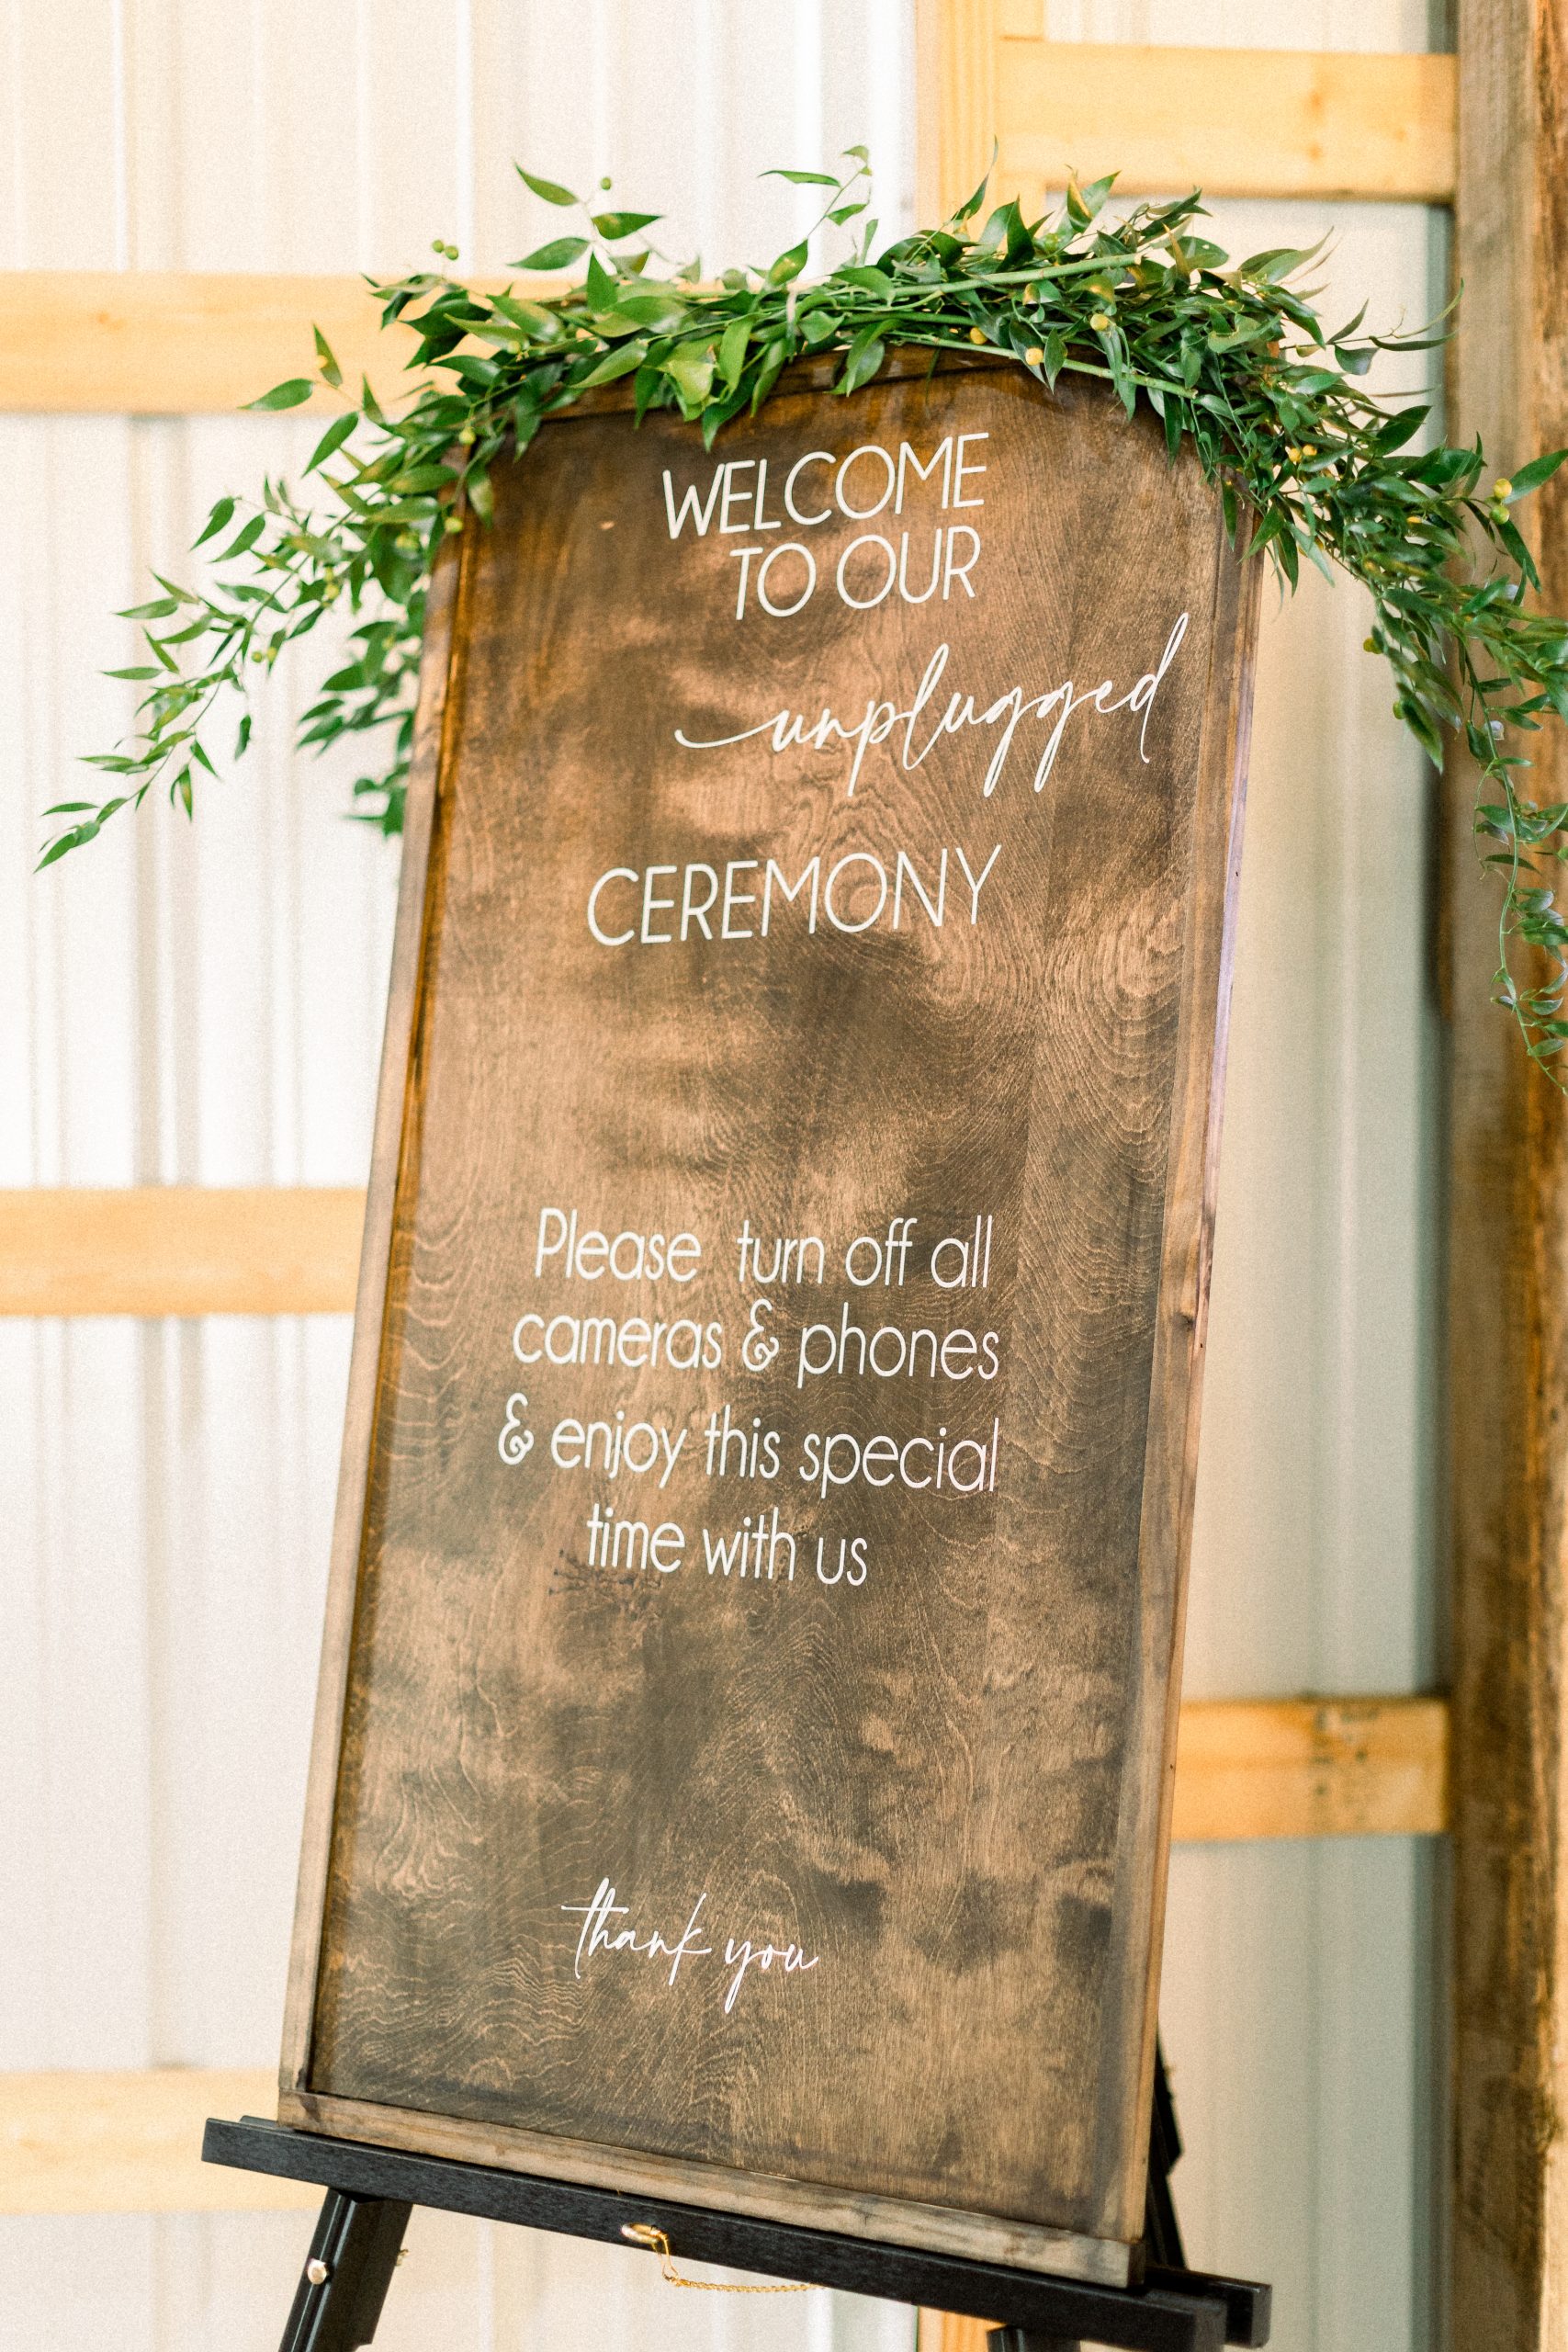 Unplugged ceremony sign at a garden party wedding